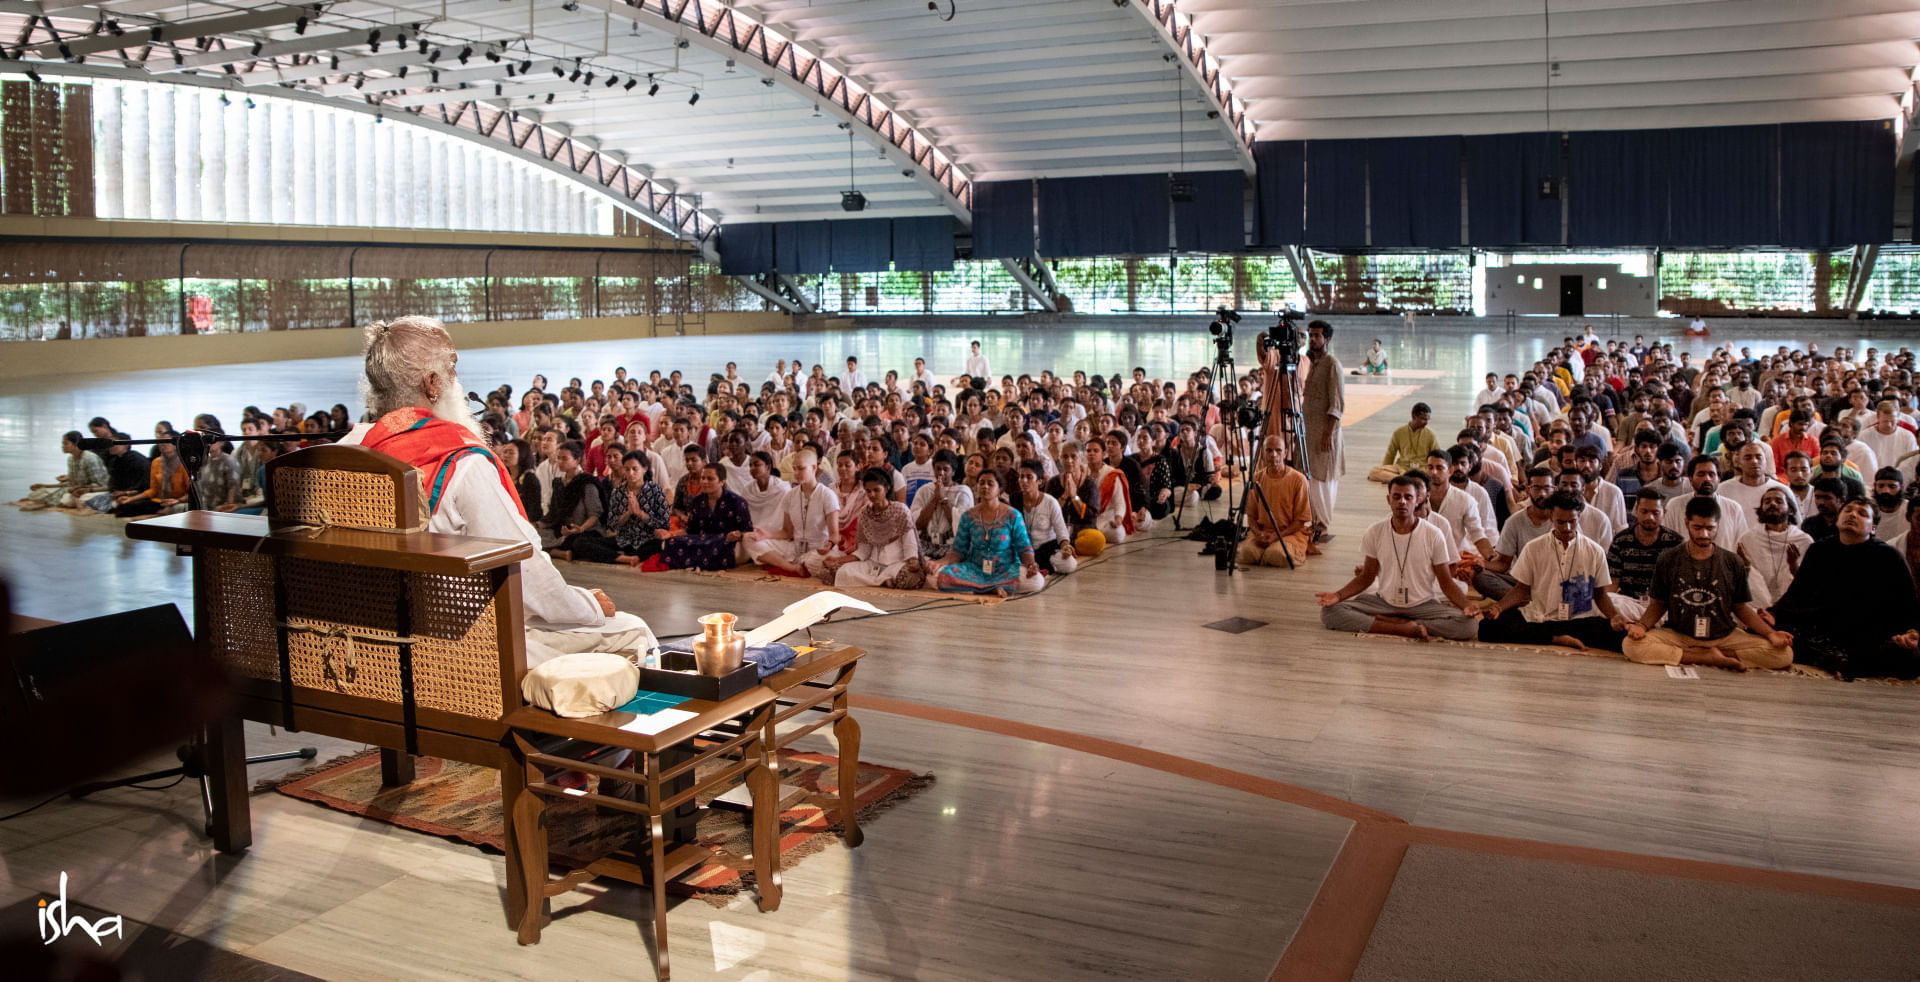 isha-blog-article-life-in-sadhanpada-consecrated-space-the-ultimate-frontier-soaked-in-grace